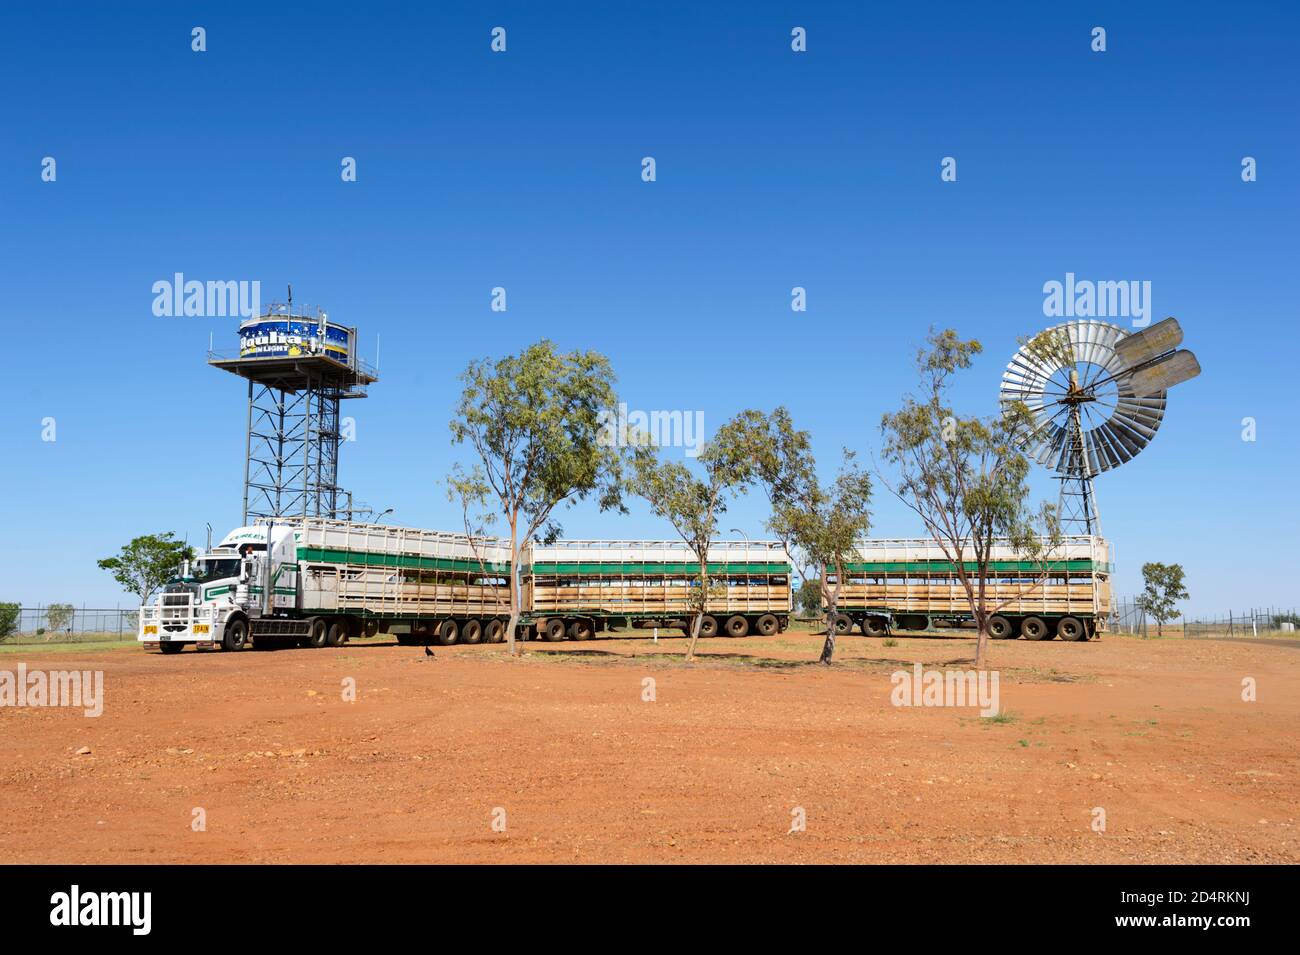 A road train or cattle truck is parked in front of a windvane and decorated water tower, Boulia, Queensland, QLD, Australia Stock Photo